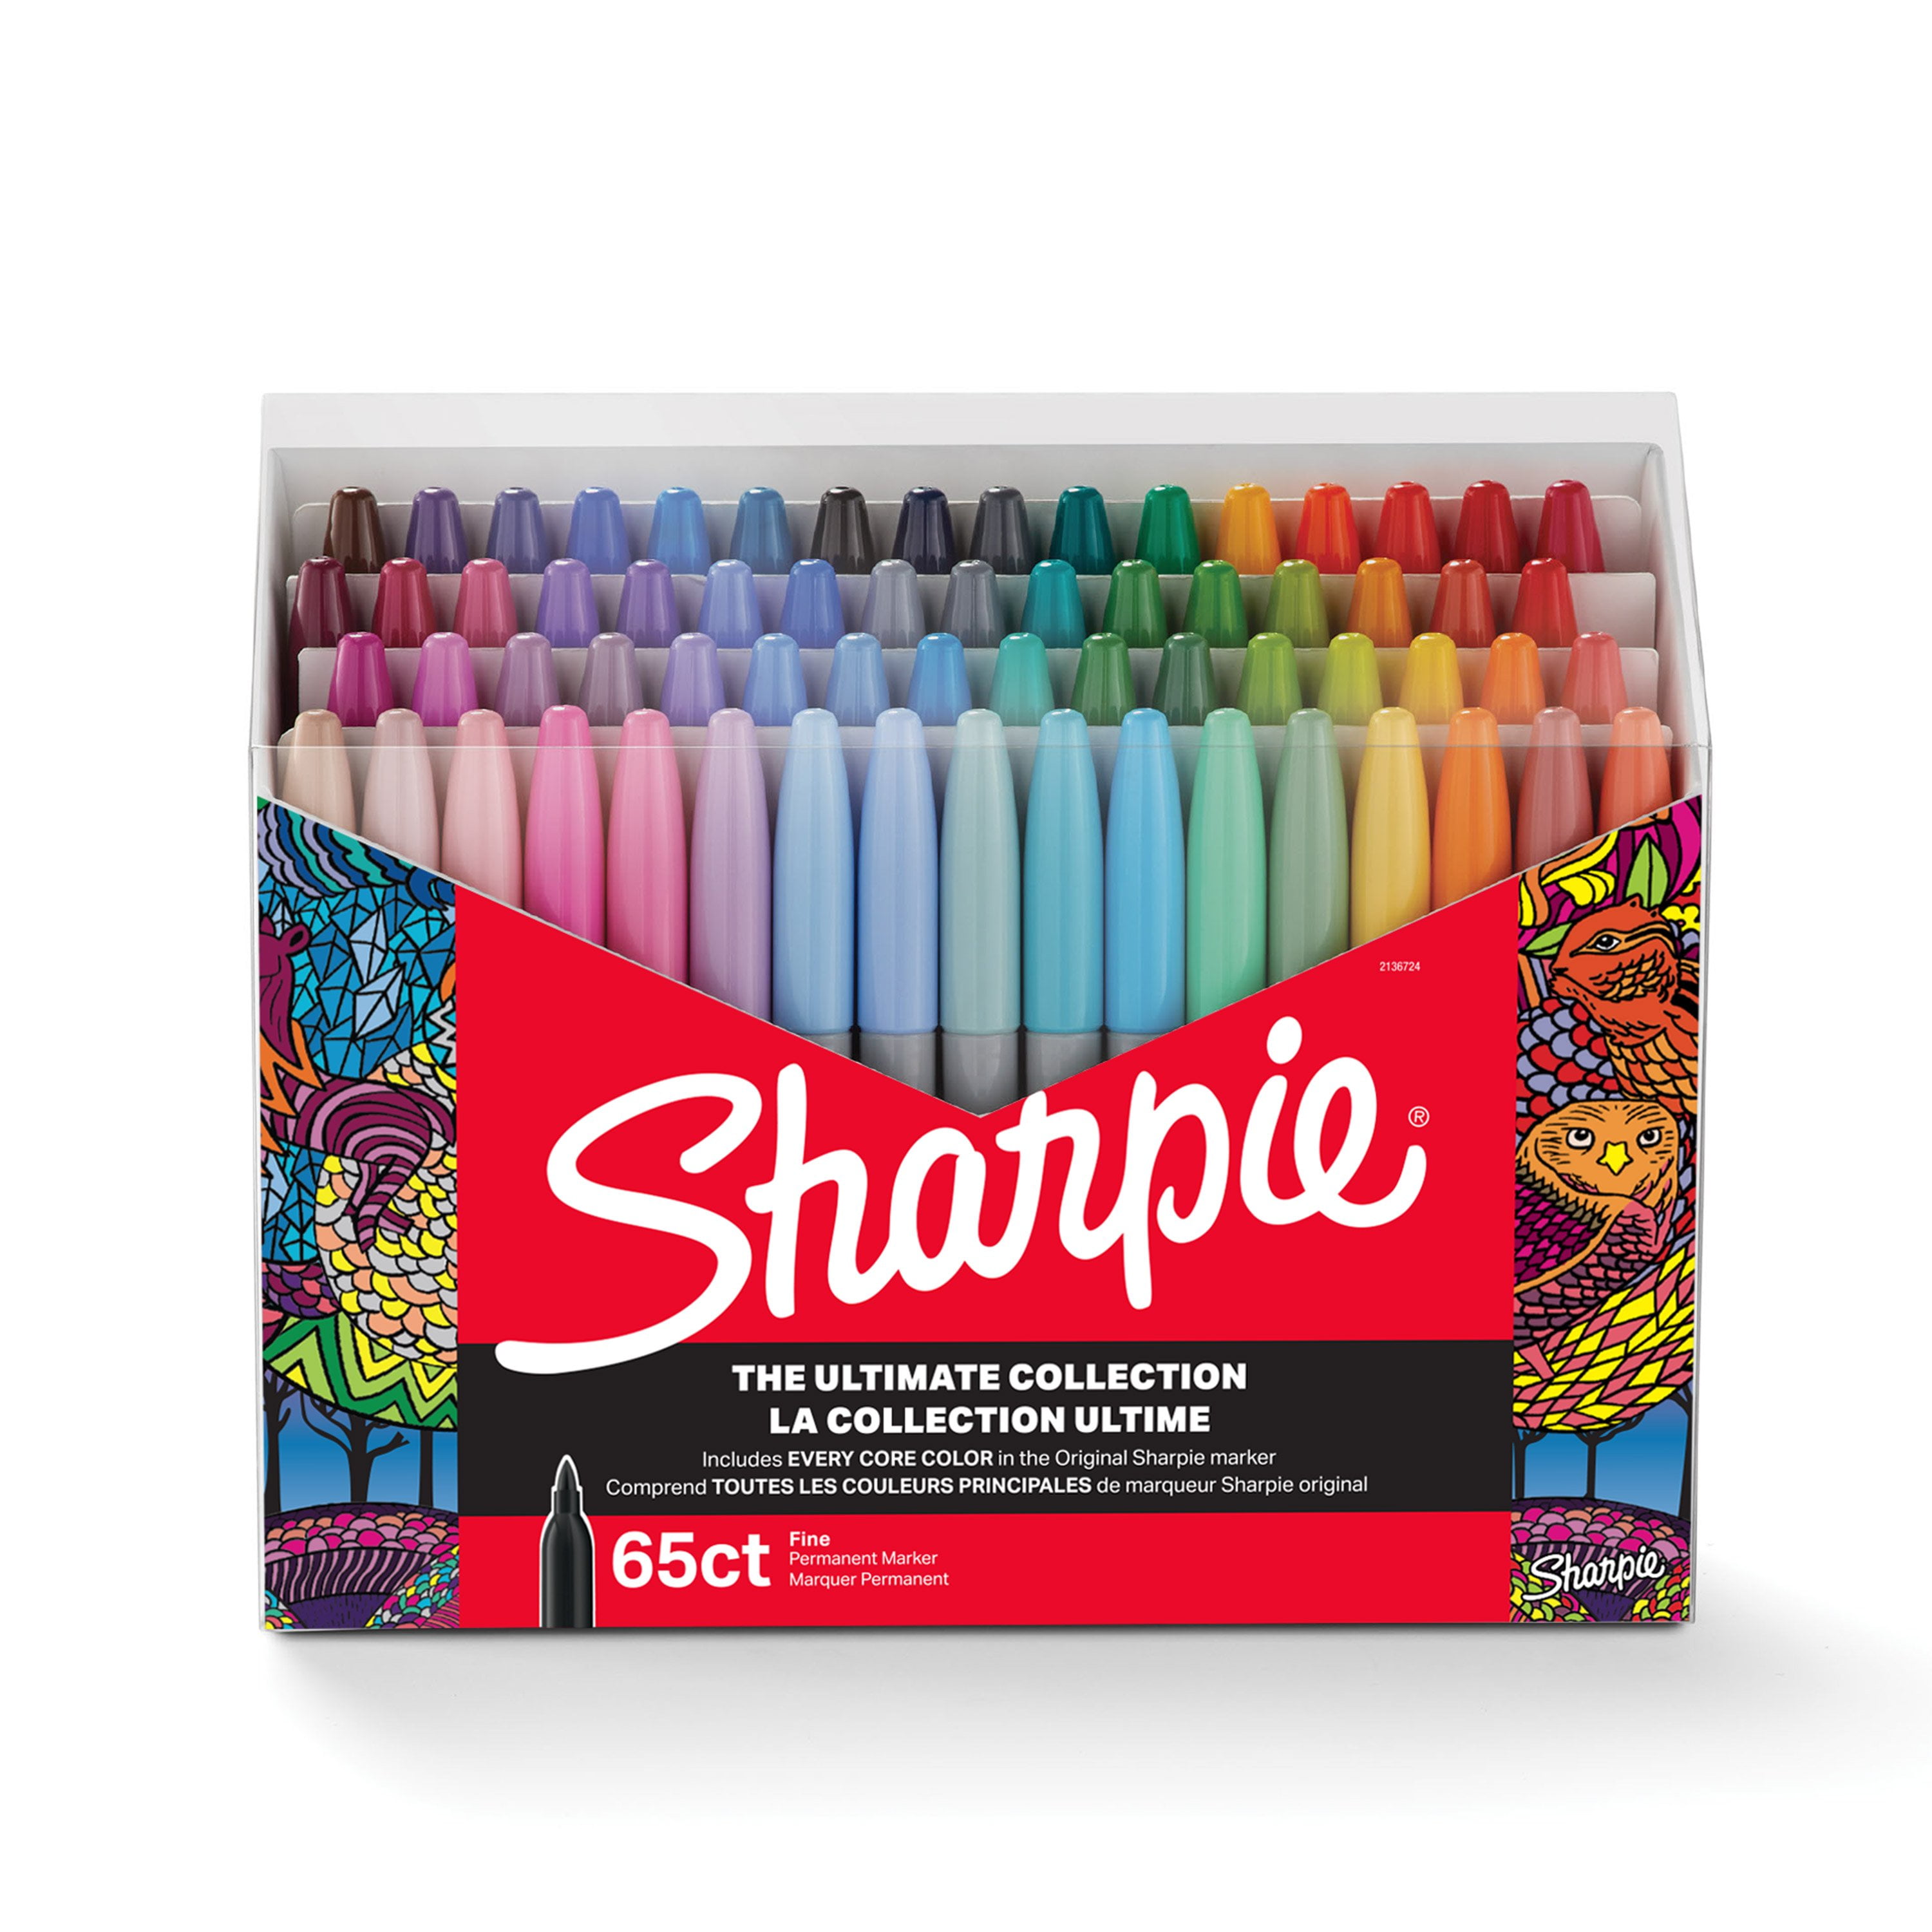 The History of Sharpies